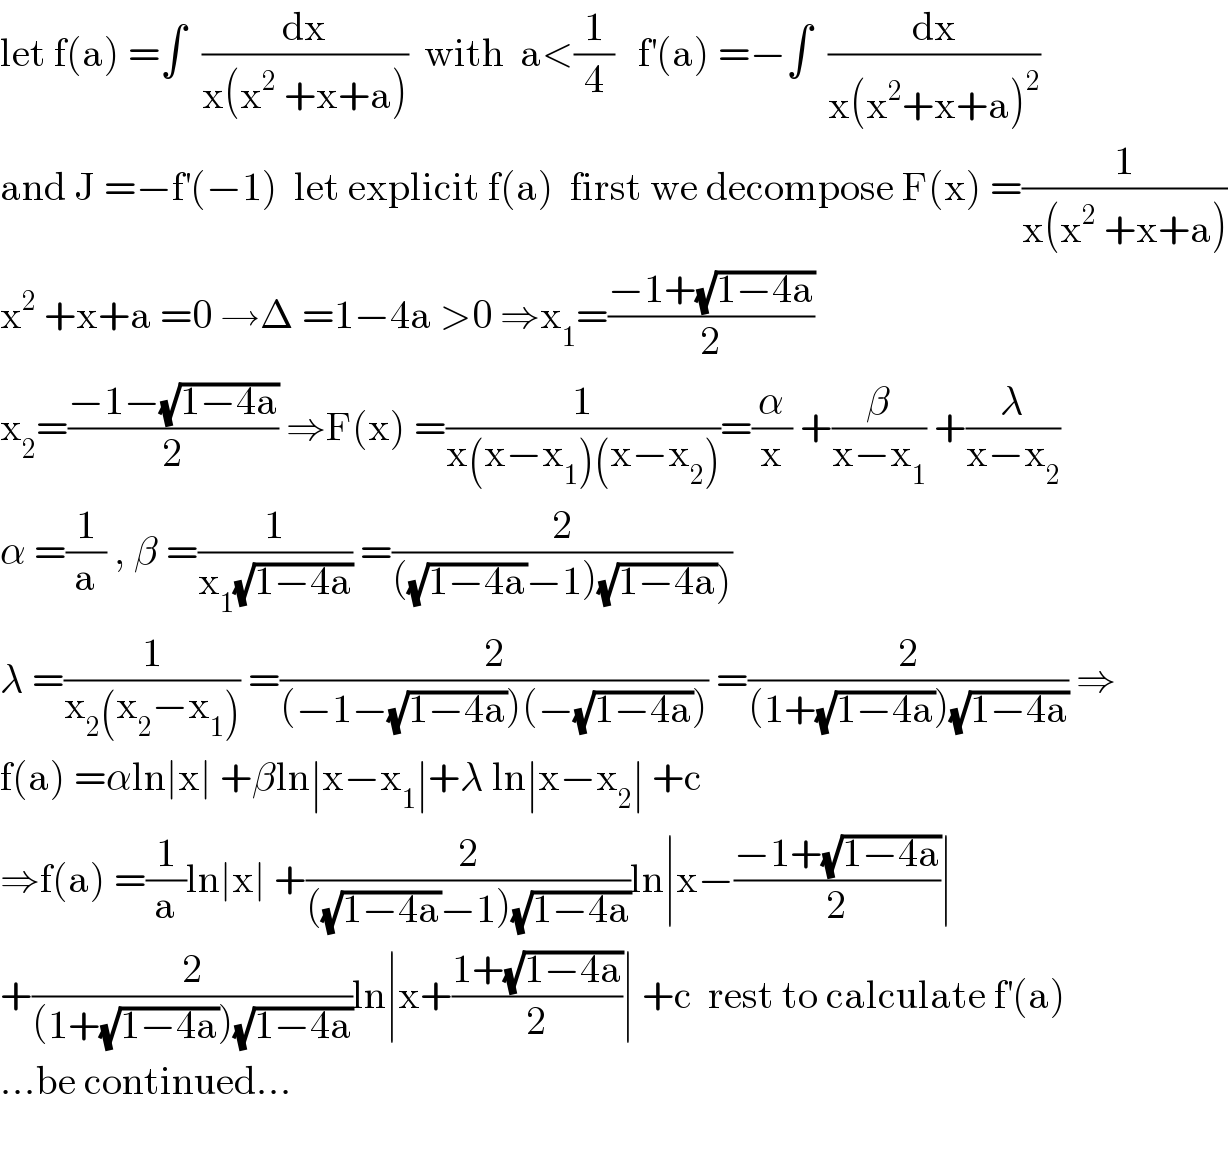 let f(a) =∫  (dx/(x(x^2  +x+a)))  with  a<(1/4)   f^′ (a) =−∫  (dx/(x(x^2 +x+a)^2 ))  and J =−f^′ (−1)  let explicit f(a)  first we decompose F(x) =(1/(x(x^2  +x+a)))  x^2  +x+a =0 →Δ =1−4a >0 ⇒x_1 =((−1+(√(1−4a)))/2)  x_2 =((−1−(√(1−4a)))/2) ⇒F(x) =(1/(x(x−x_1 )(x−x_2 )))=(α/x) +(β/(x−x_1 )) +(λ/(x−x_2 ))    α =(1/a) , β =(1/(x_1 (√(1−4a)))) =(2/(((√(1−4a))−1)(√(1−4a)))))  λ =(1/(x_2 (x_2 −x_1 ))) =(2/((−1−(√(1−4a)))(−(√(1−4a))))) =(2/((1+(√(1−4a)))(√(1−4a)))) ⇒  f(a) =αln∣x∣ +βln∣x−x_1 ∣+λ ln∣x−x_2 ∣ +c  ⇒f(a) =(1/a)ln∣x∣ +(2/(((√(1−4a))−1)(√(1−4a))))ln∣x−((−1+(√(1−4a)))/2)∣  +(2/((1+(√(1−4a)))(√(1−4a))))ln∣x+((1+(√(1−4a)))/2)∣ +c  rest to calculate f^′ (a)   ...be continued...    